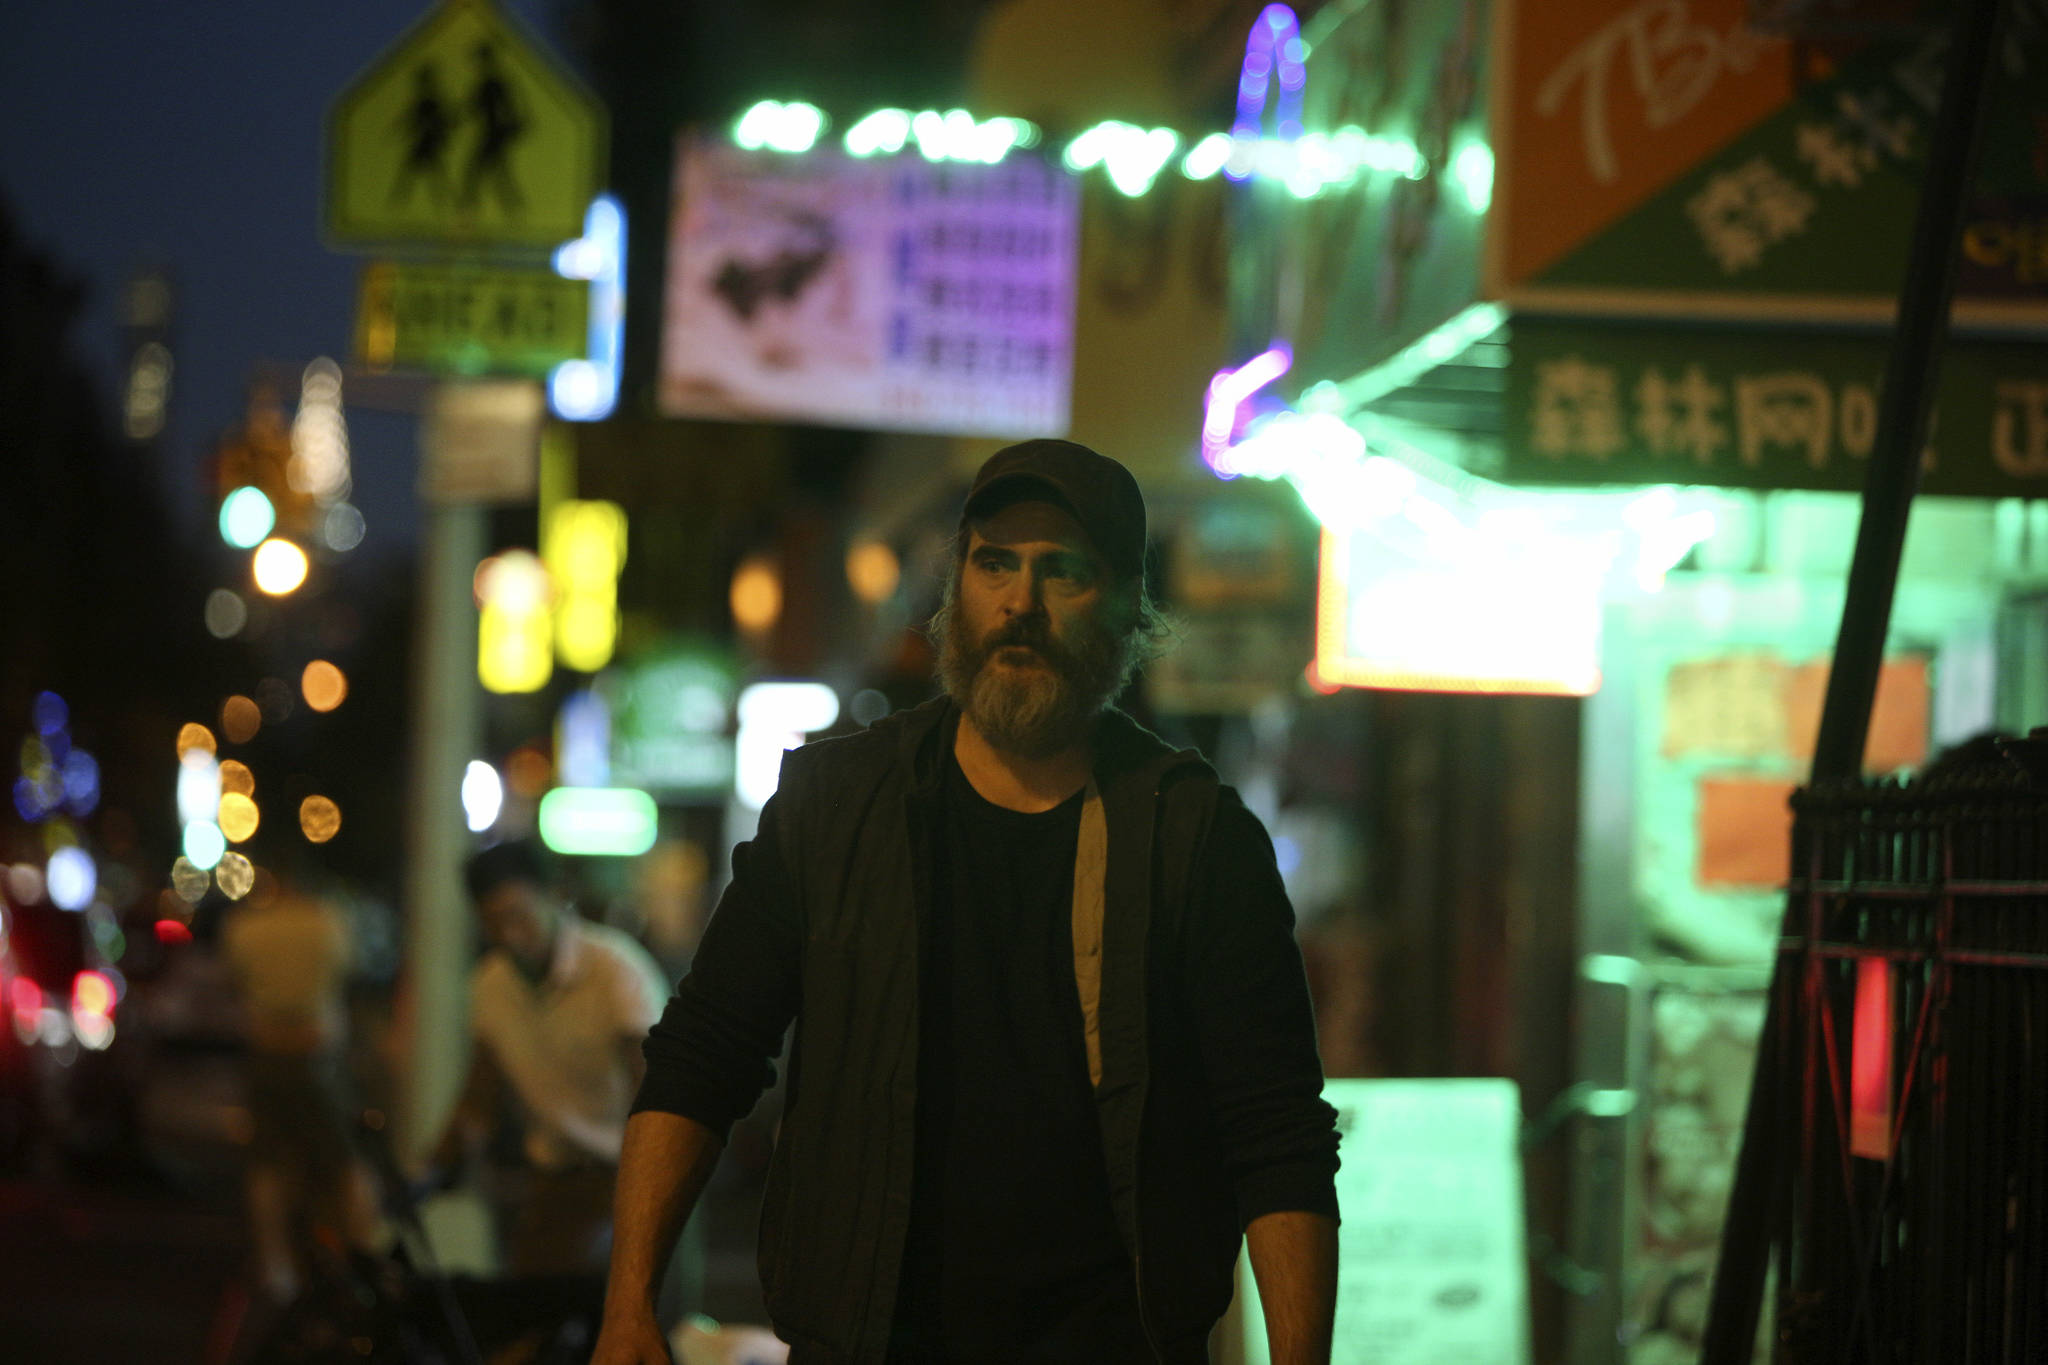 Joaquin Phoenix in Lynne Ramsay’s You Were Never Really Here. Photo by Alison Cohen Rosa/Amazon Studios